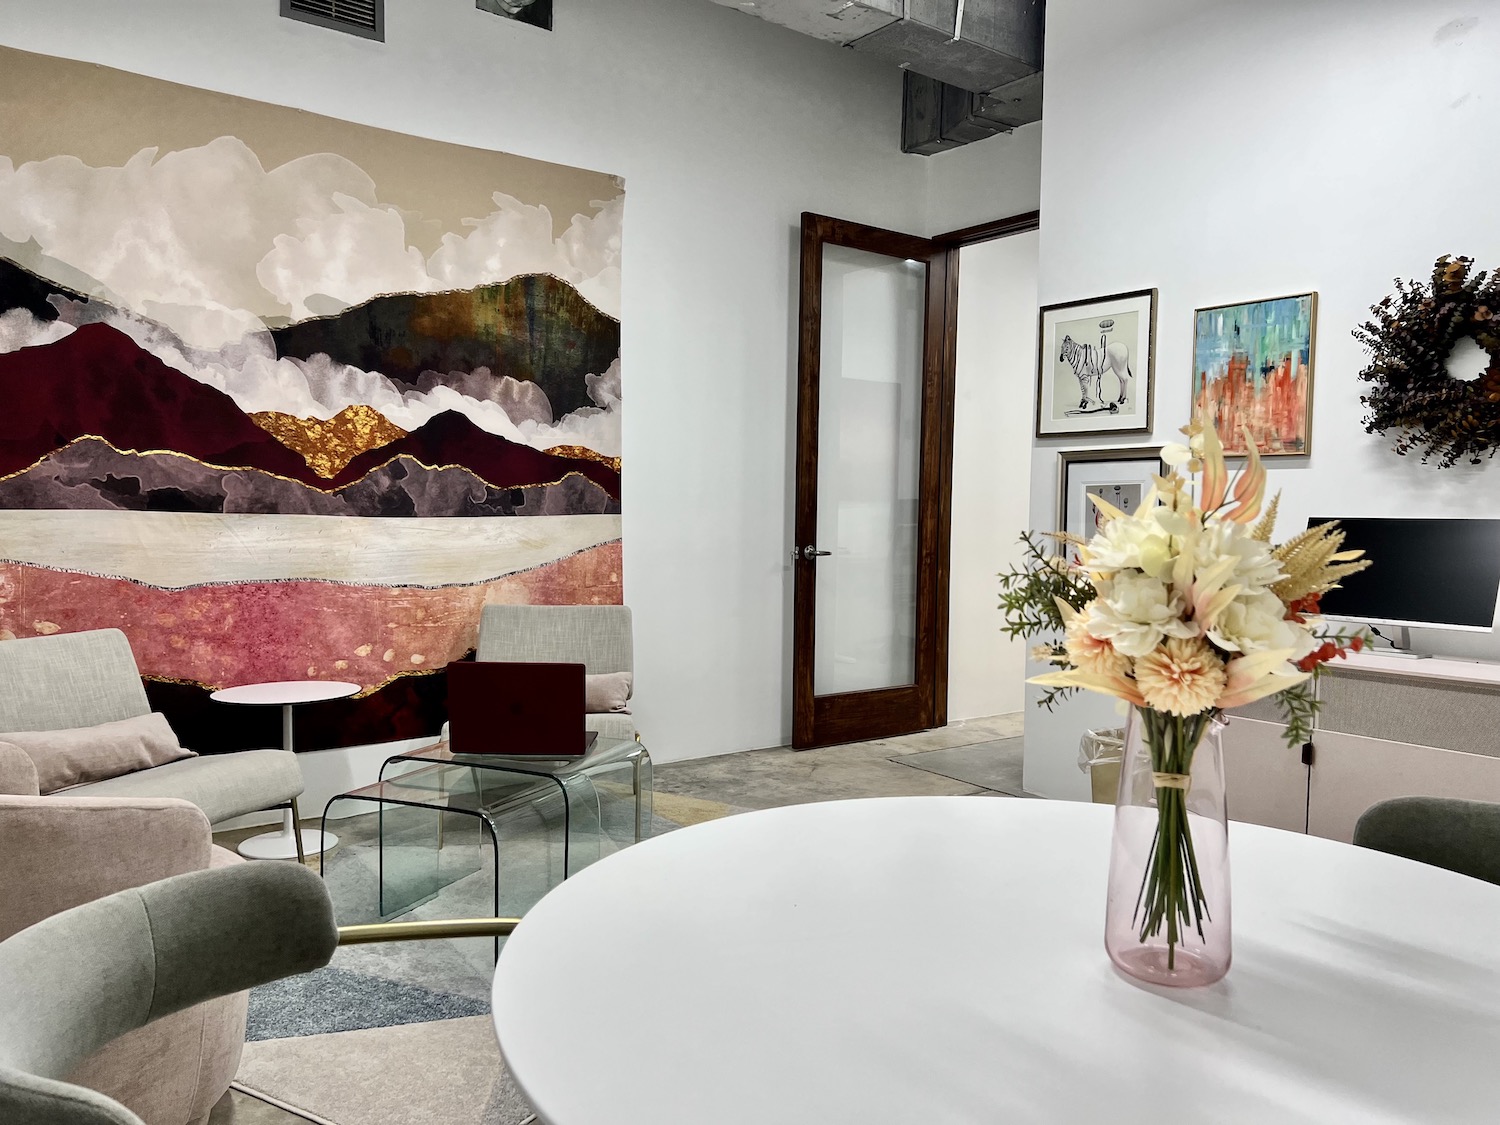 Office Share space of white bistro table, soft lounge seating and lots of art. An inspiring affordable space located at Sesh Coworking in Houston, Texas